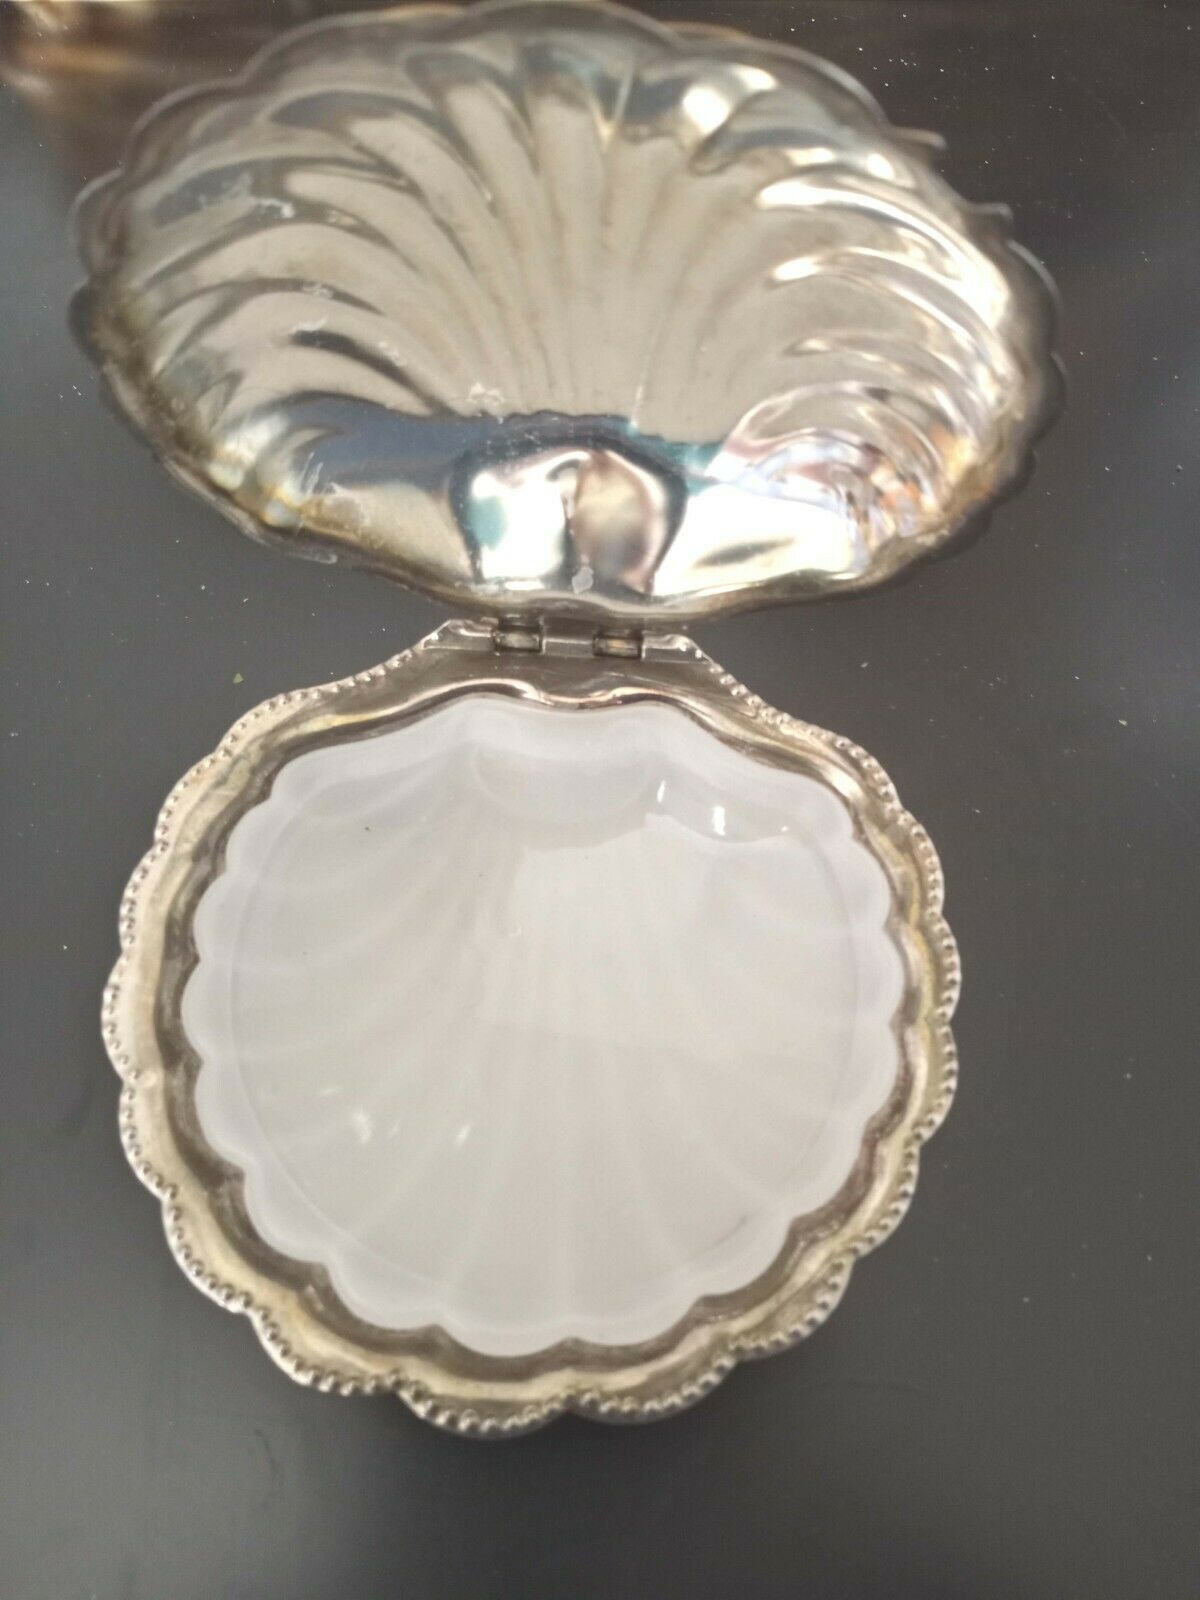 Vintage Silverplate Clam Shell Footed W/ Handle W/ Dish Insert Butter Dish